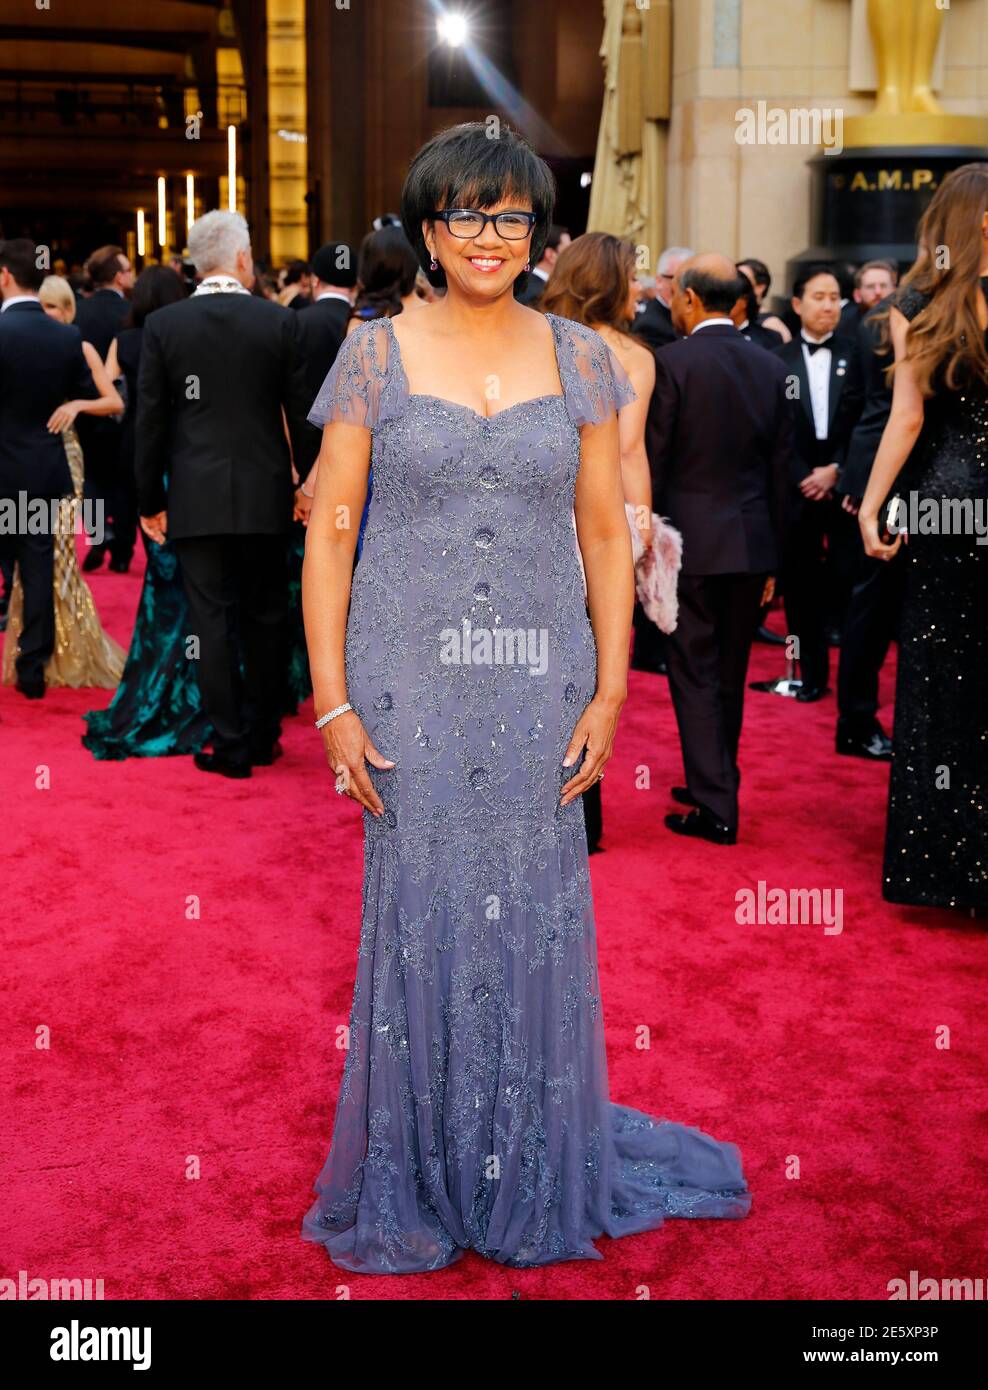 Academy of Motion Picture Arts and Sciences President Cheryl Boone Isaacs arrives  at the 86th Academy Awards in Hollywood, California March 2, 2014.  REUTERS/Mike Blake (UNITED STATES TAGS: ENTERTAINMENT) (OSCARS-ARRIVALS) Stock Photo